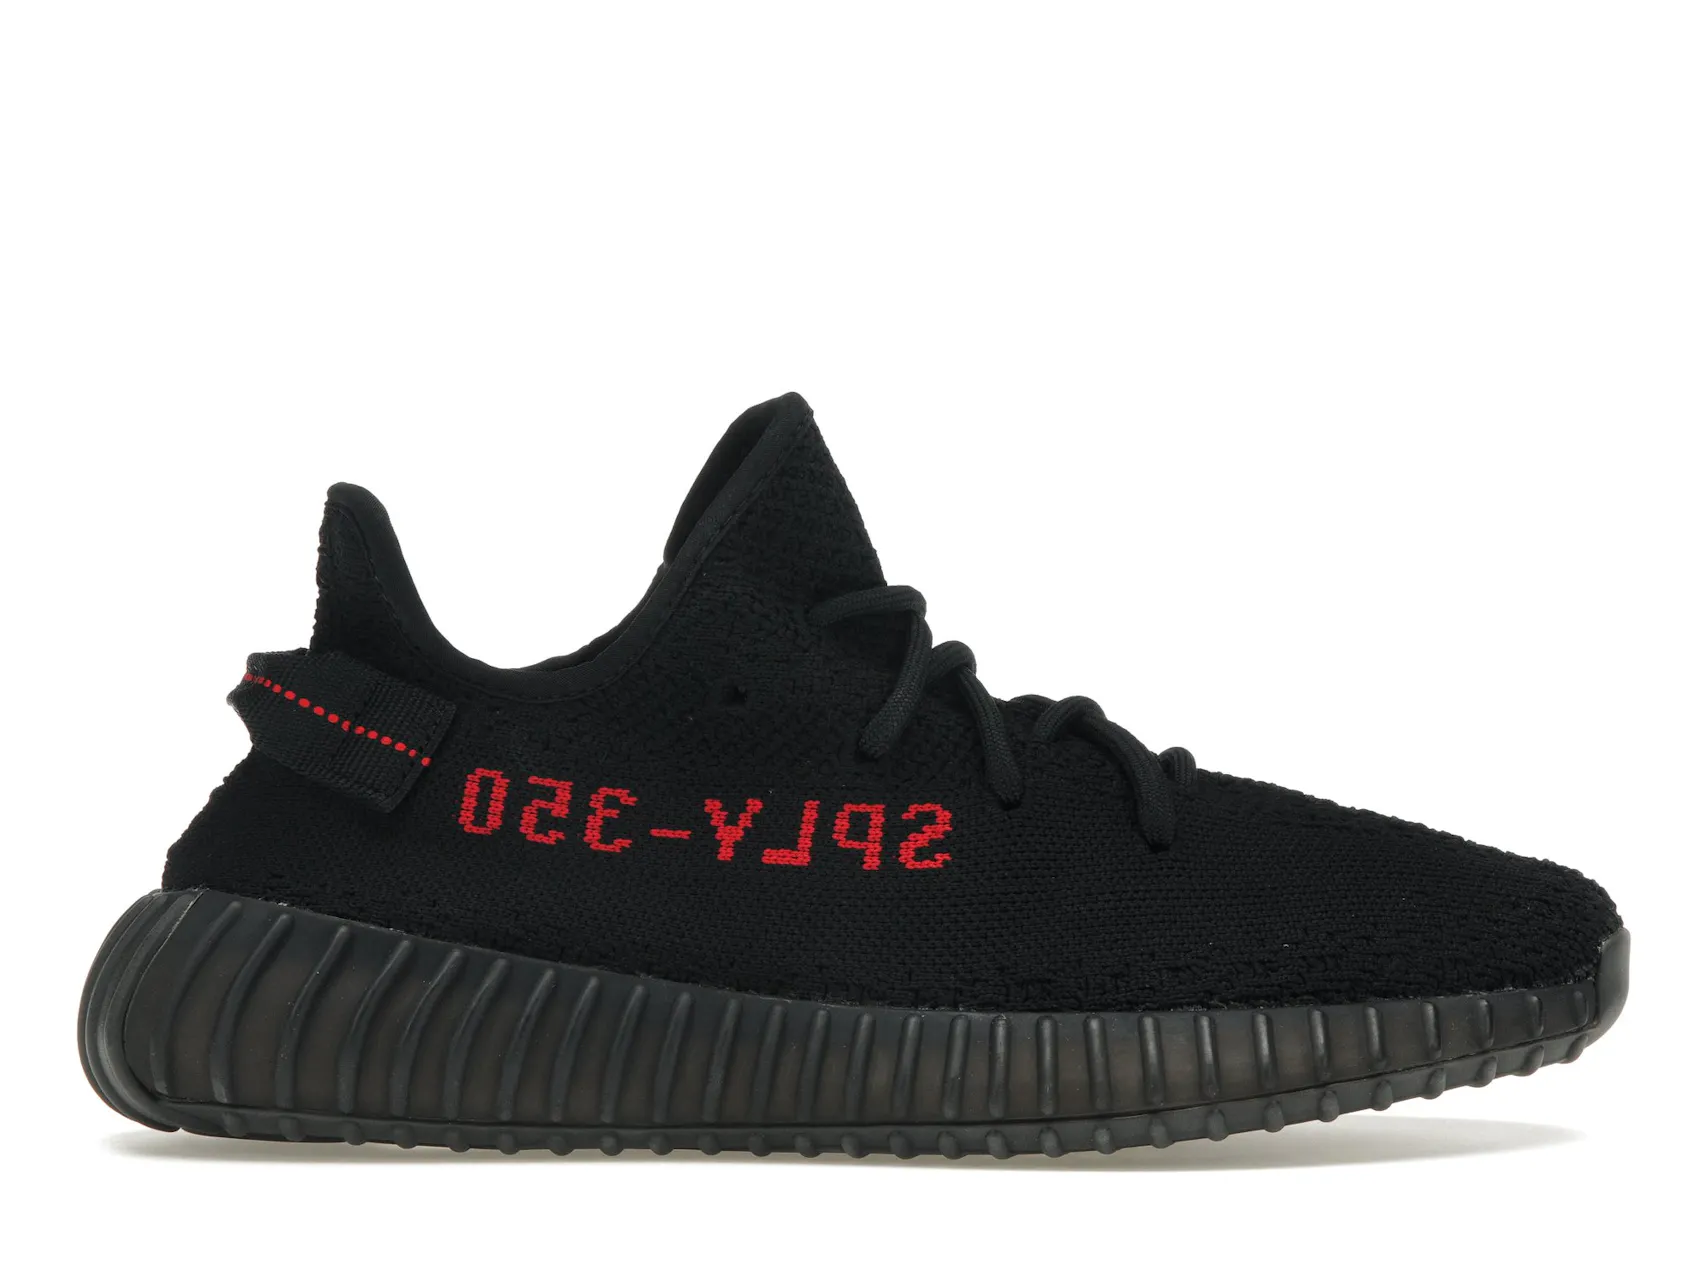 adidas Yeezy Boost 350 V2 Black Red (2017/2020) - CP9652